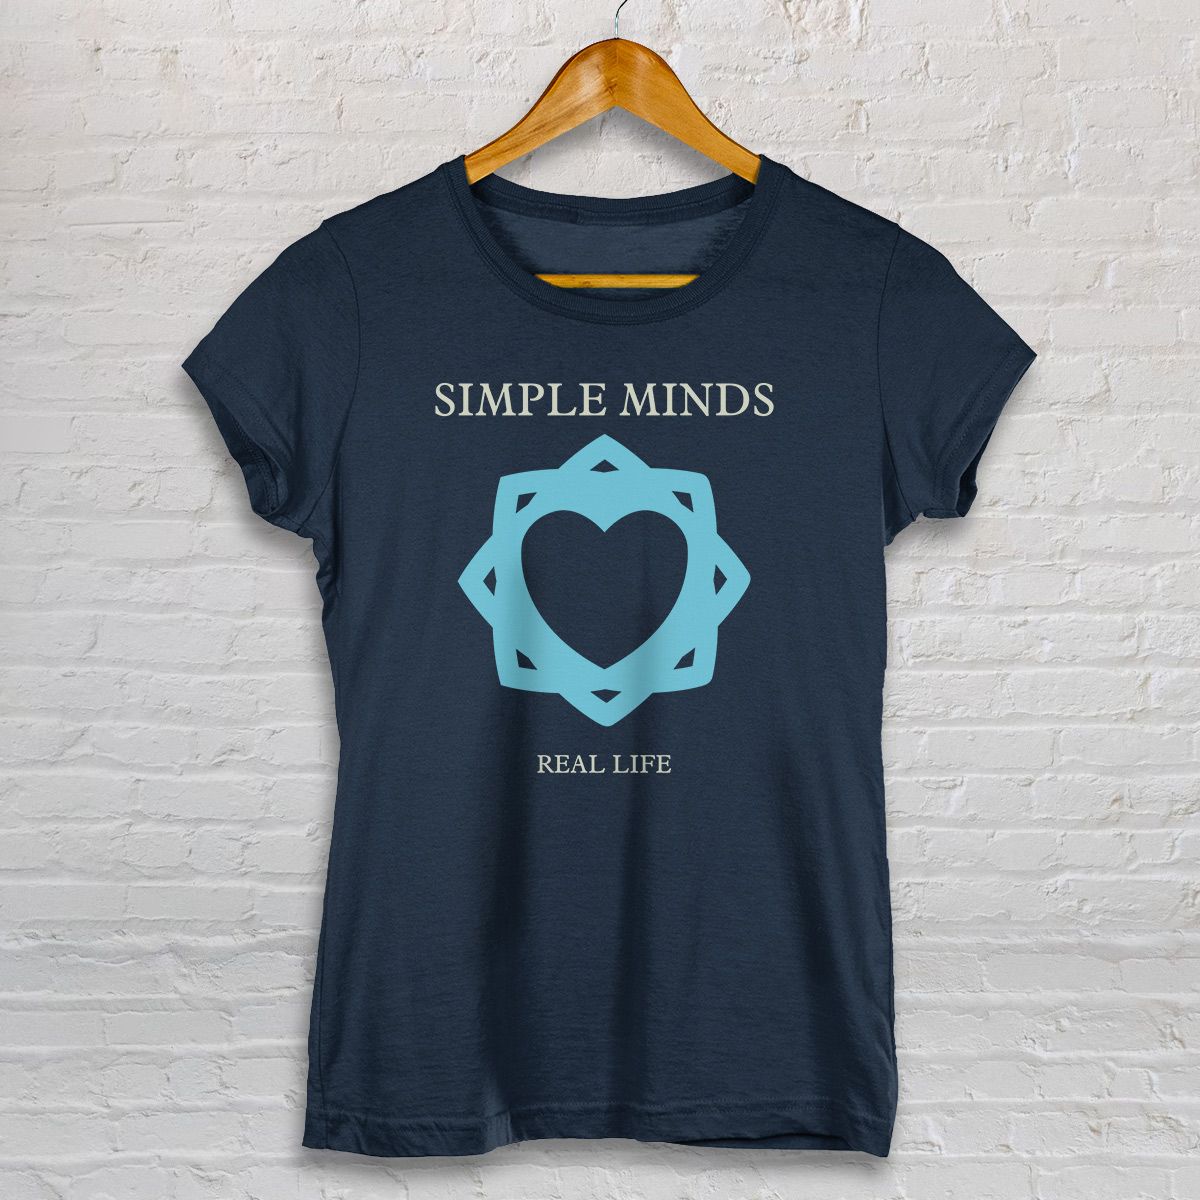 Nome do produto: BABY LOOK - SIMPLE MINDS - REAL LIFE